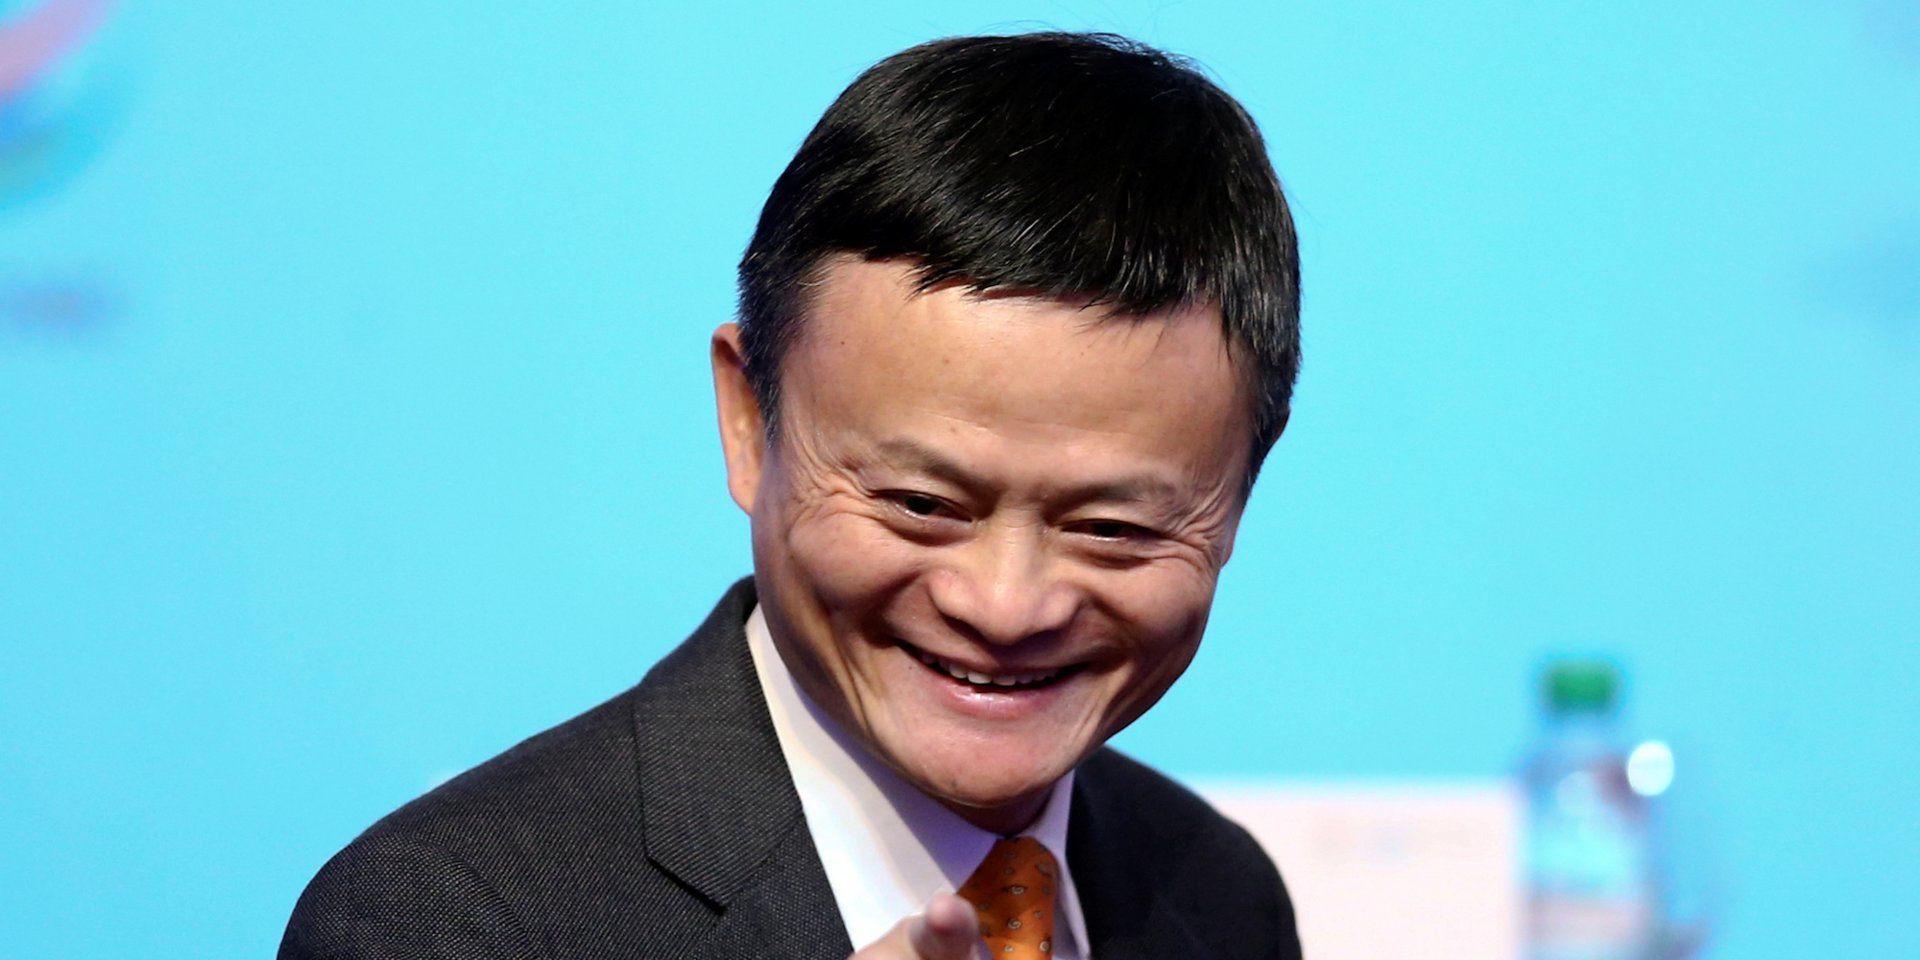 Alibaba just had the biggest online shopping day of all time, nearly tripling every company’s 2017 Black Friday and Cyber Monday sales combined